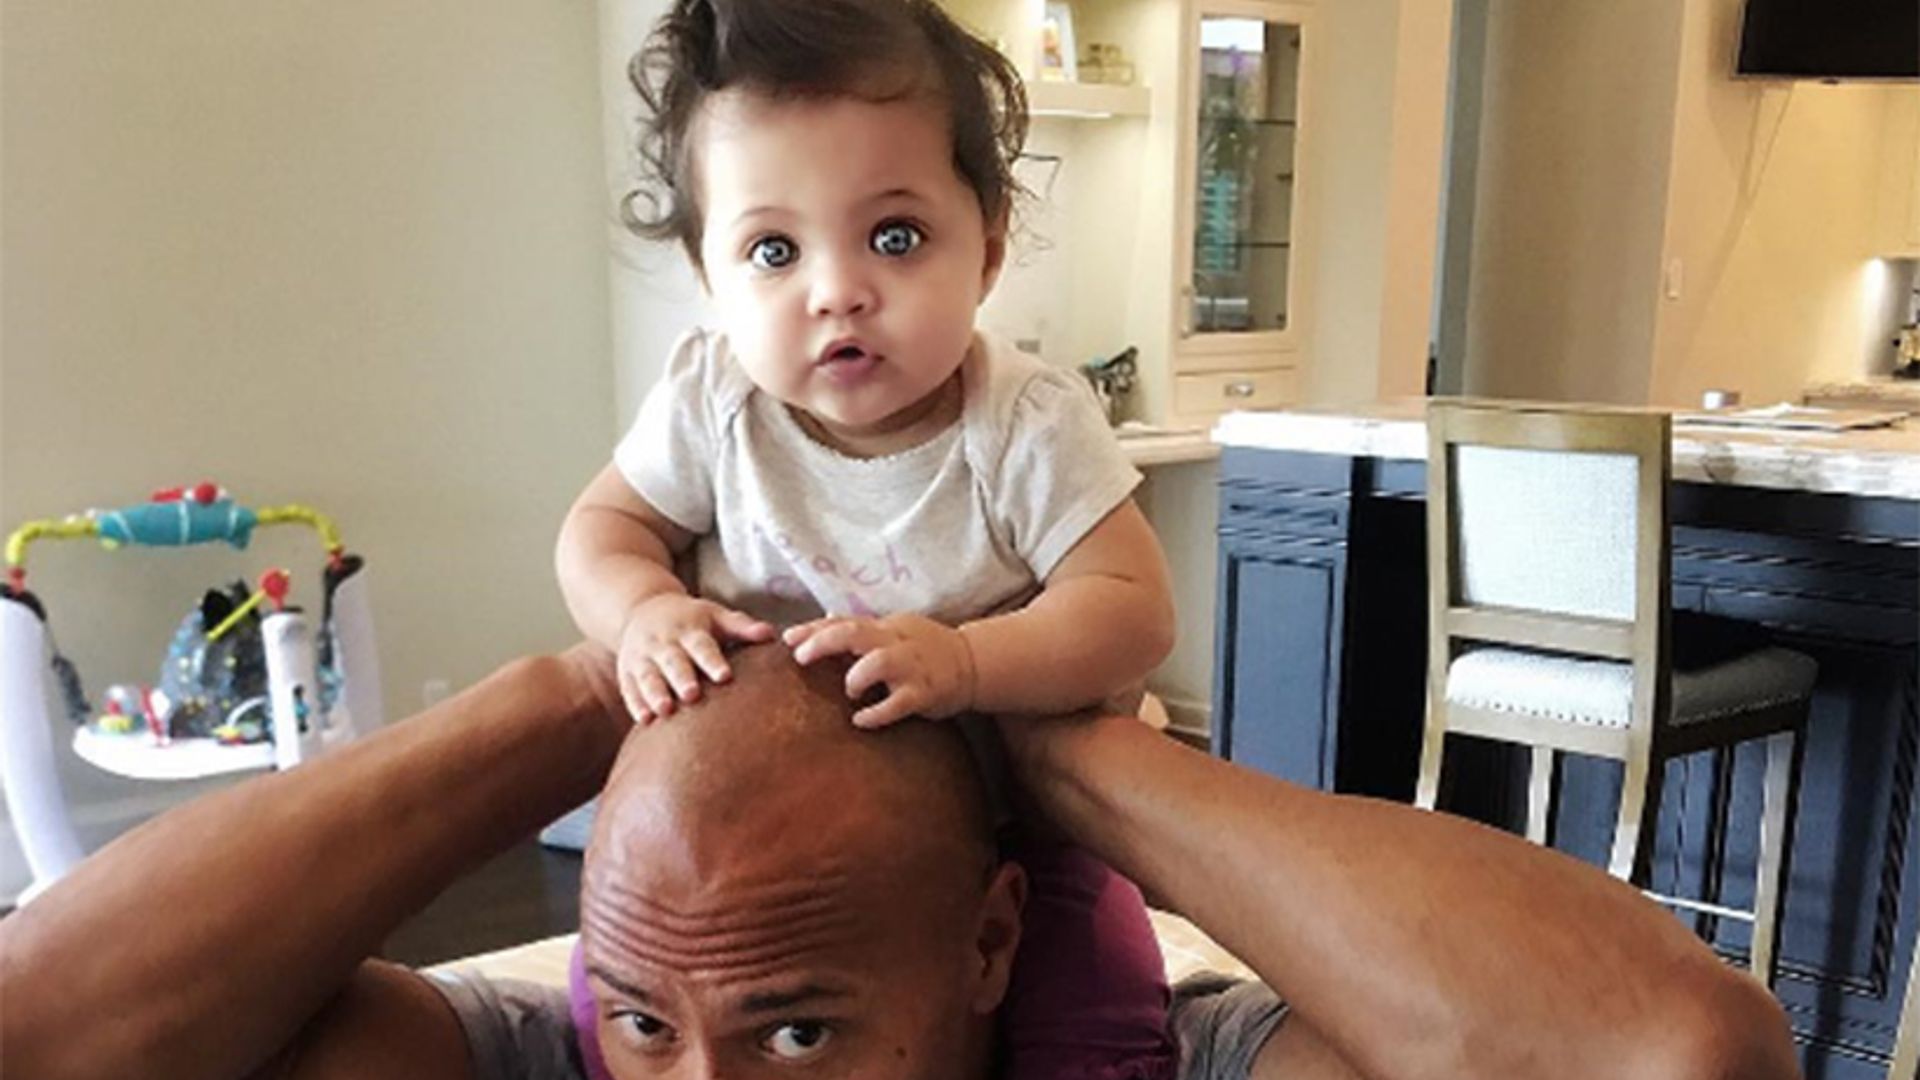 Dwayne 'The Rock' Johnson shares funny father-daughter story on Instagram